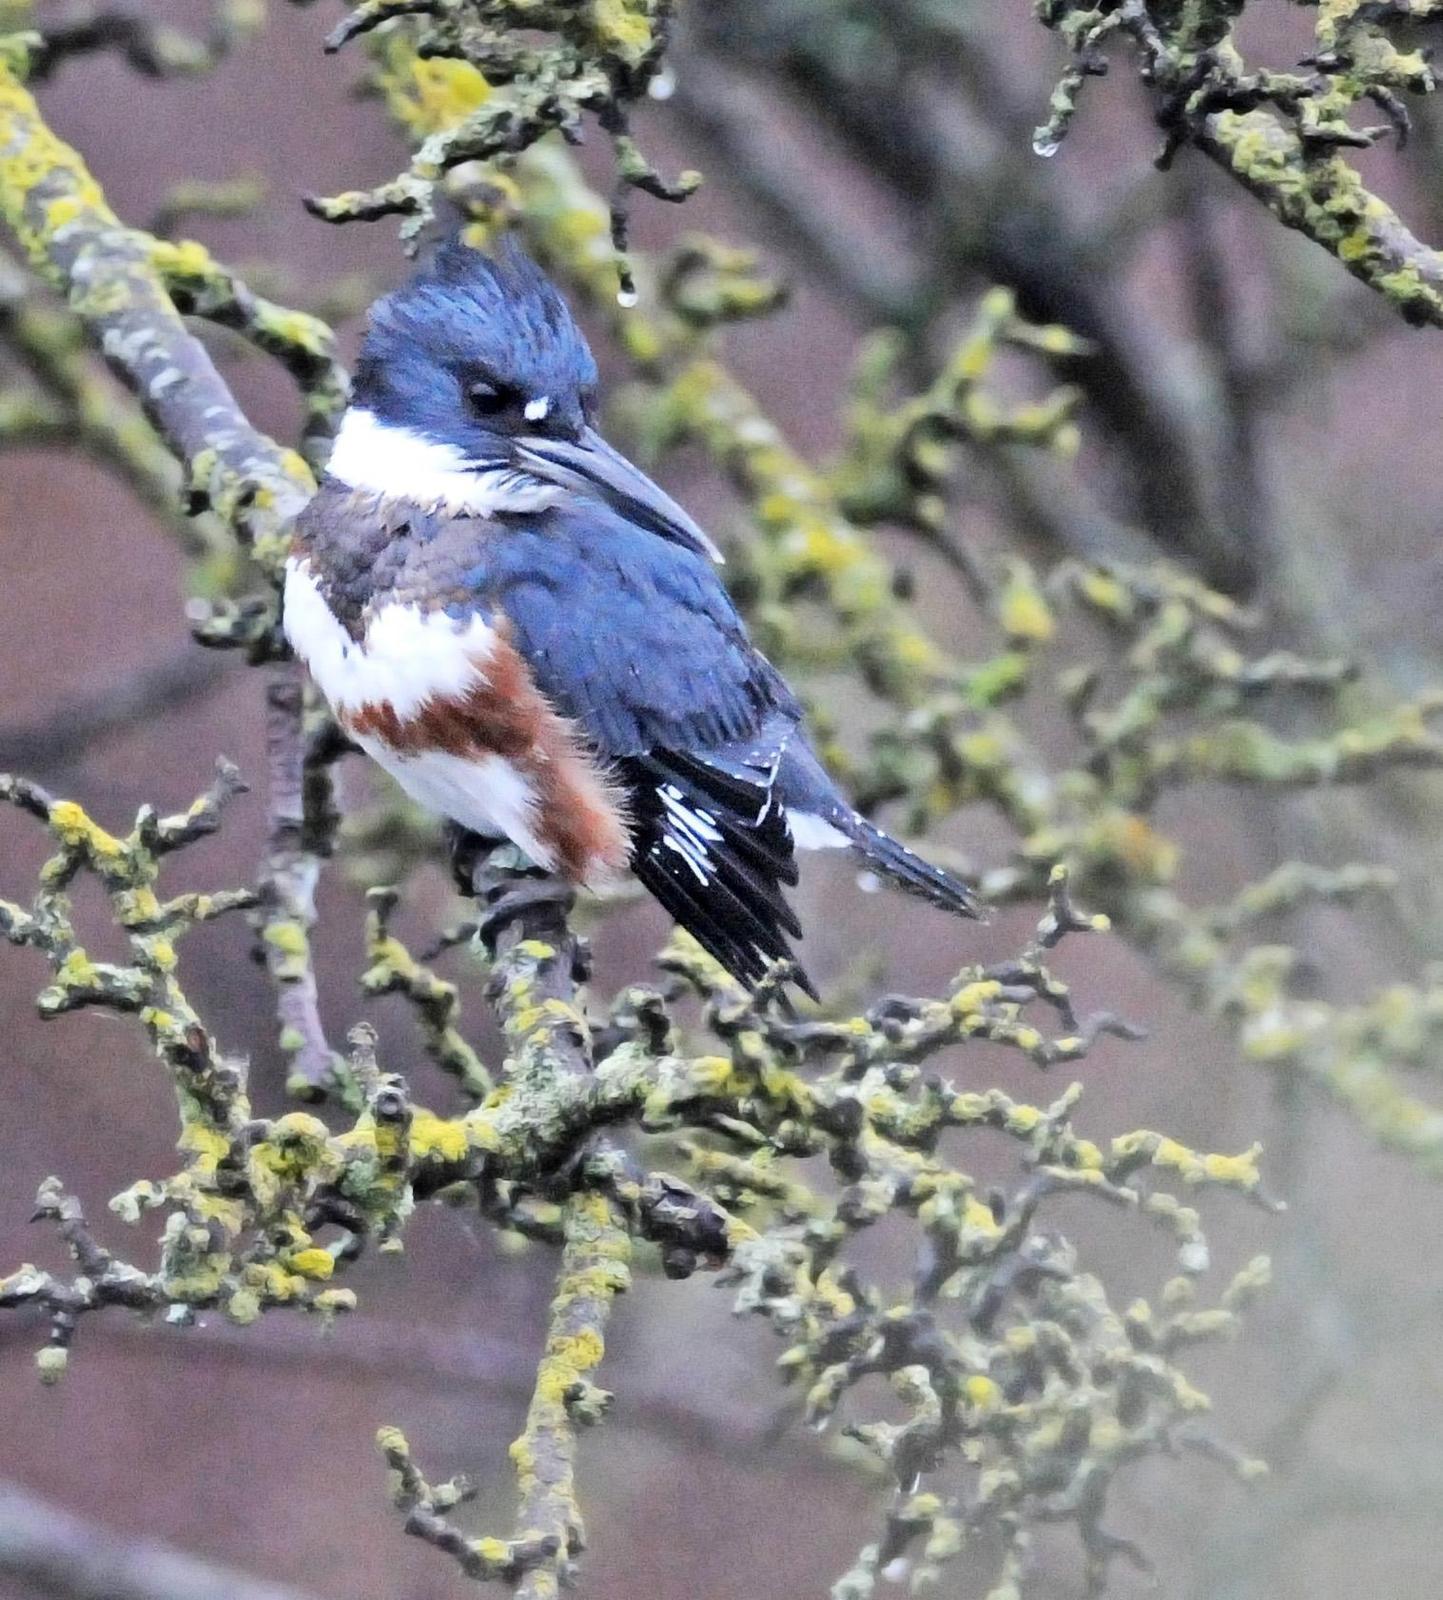 Belted Kingfisher Photo by Steven Mlodinow